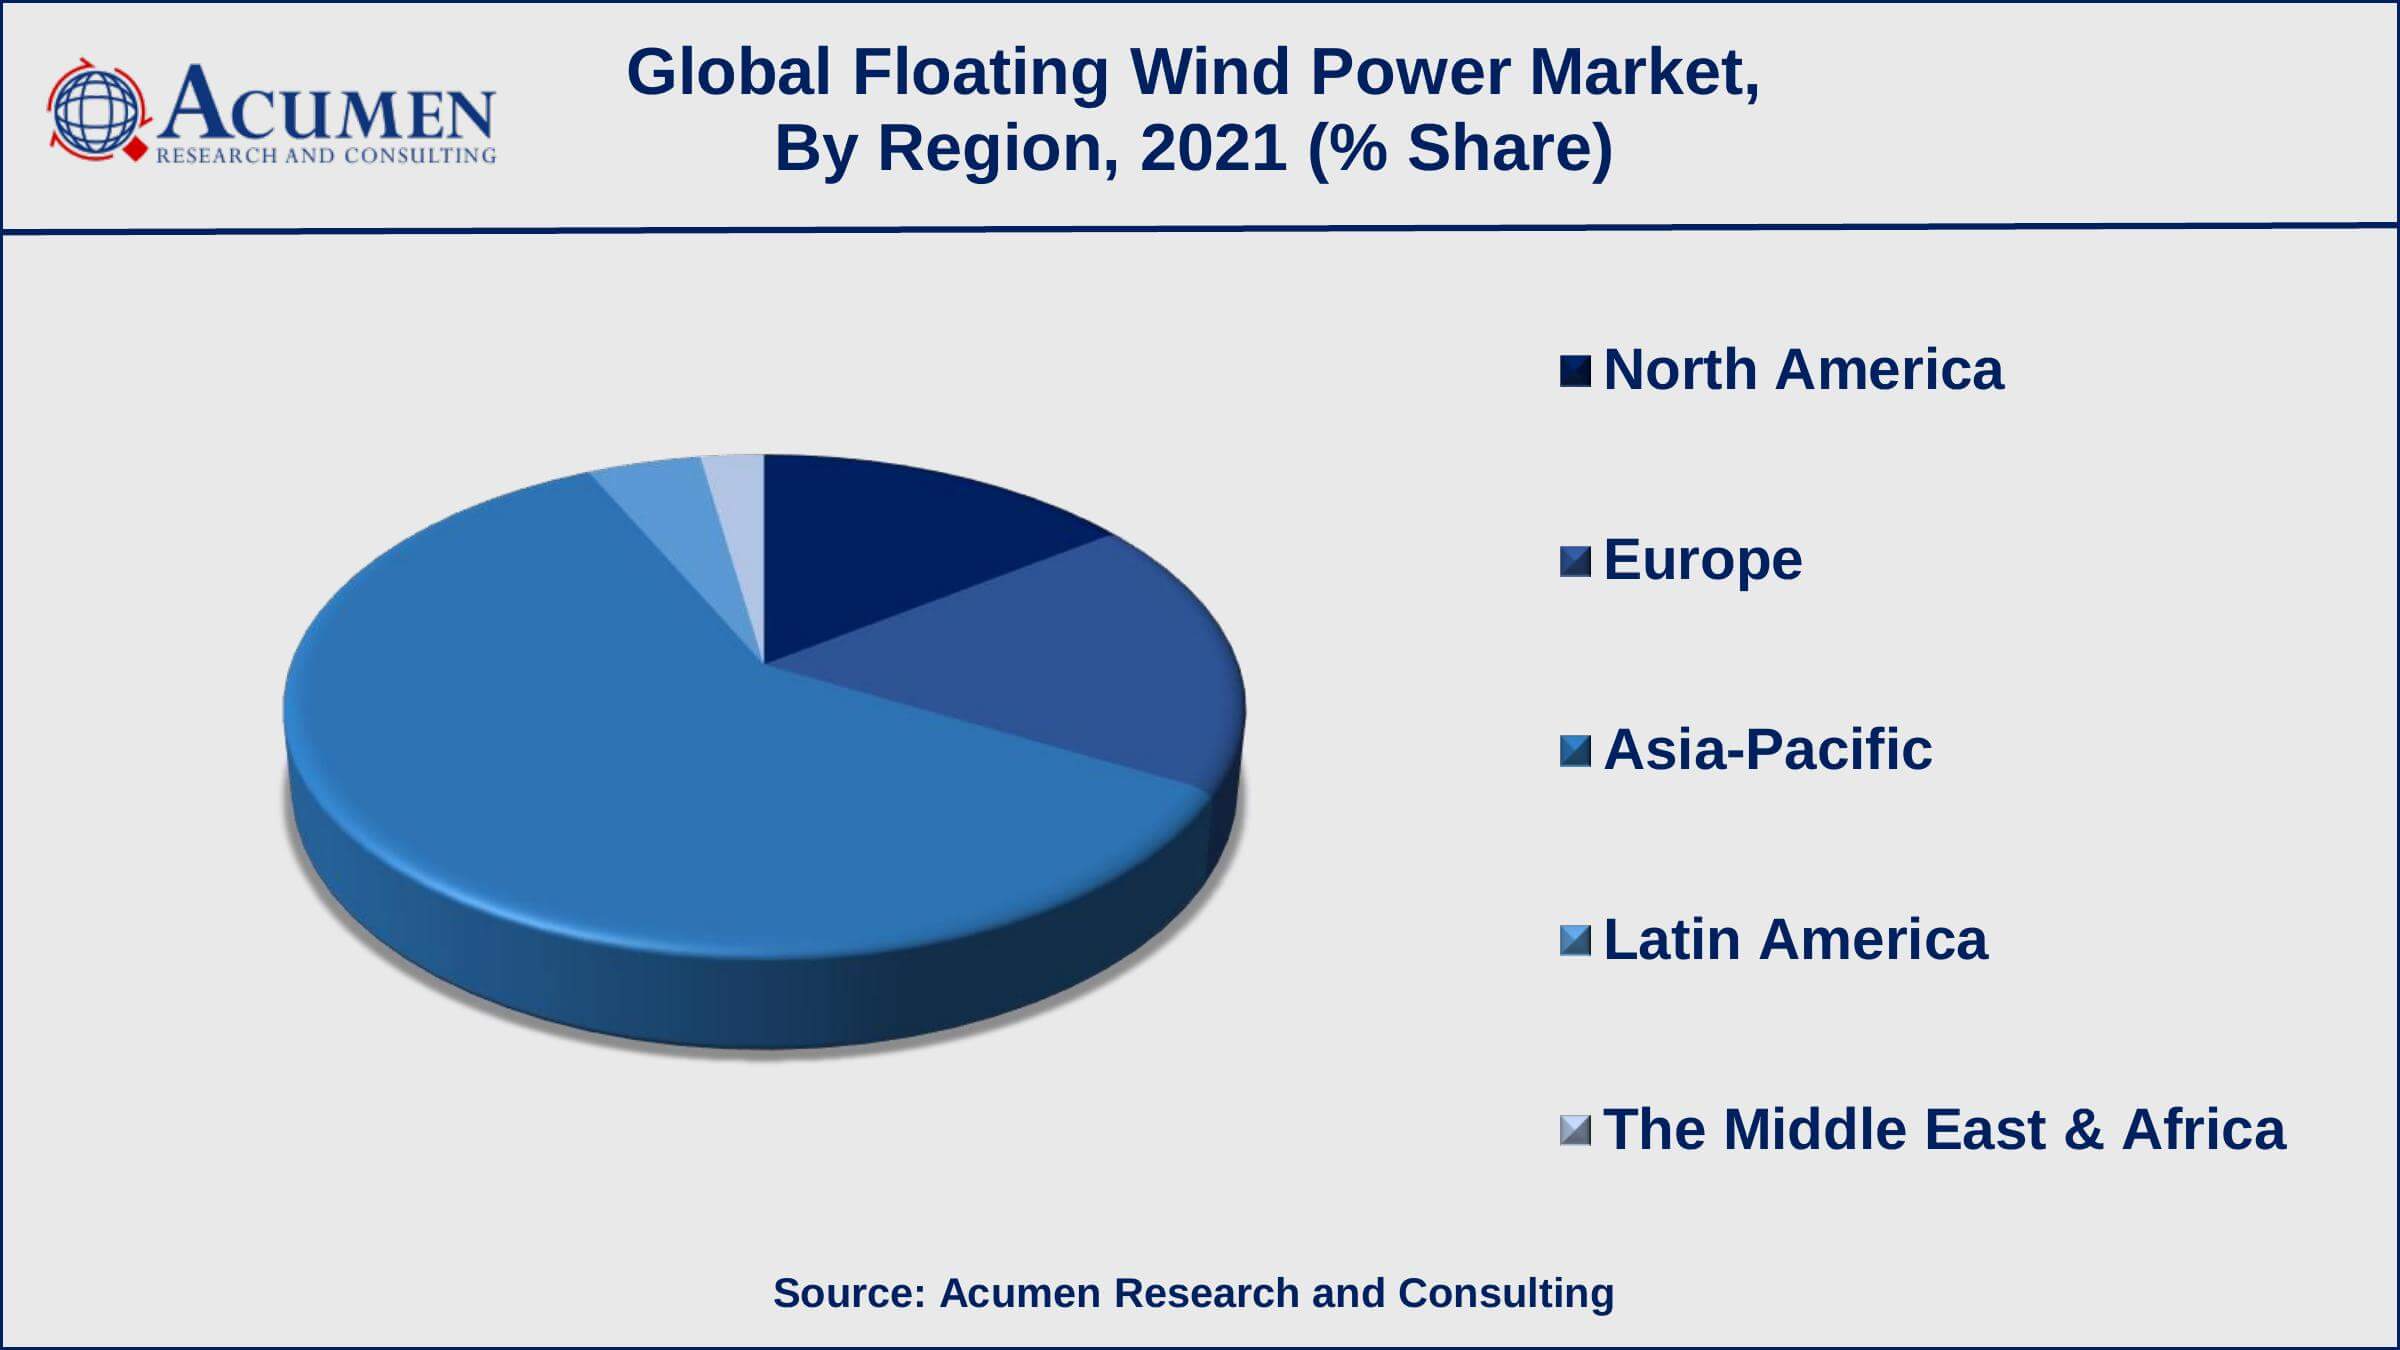 As per the European Government Statistics, the region set to target 450GW of offshore wind by 2050